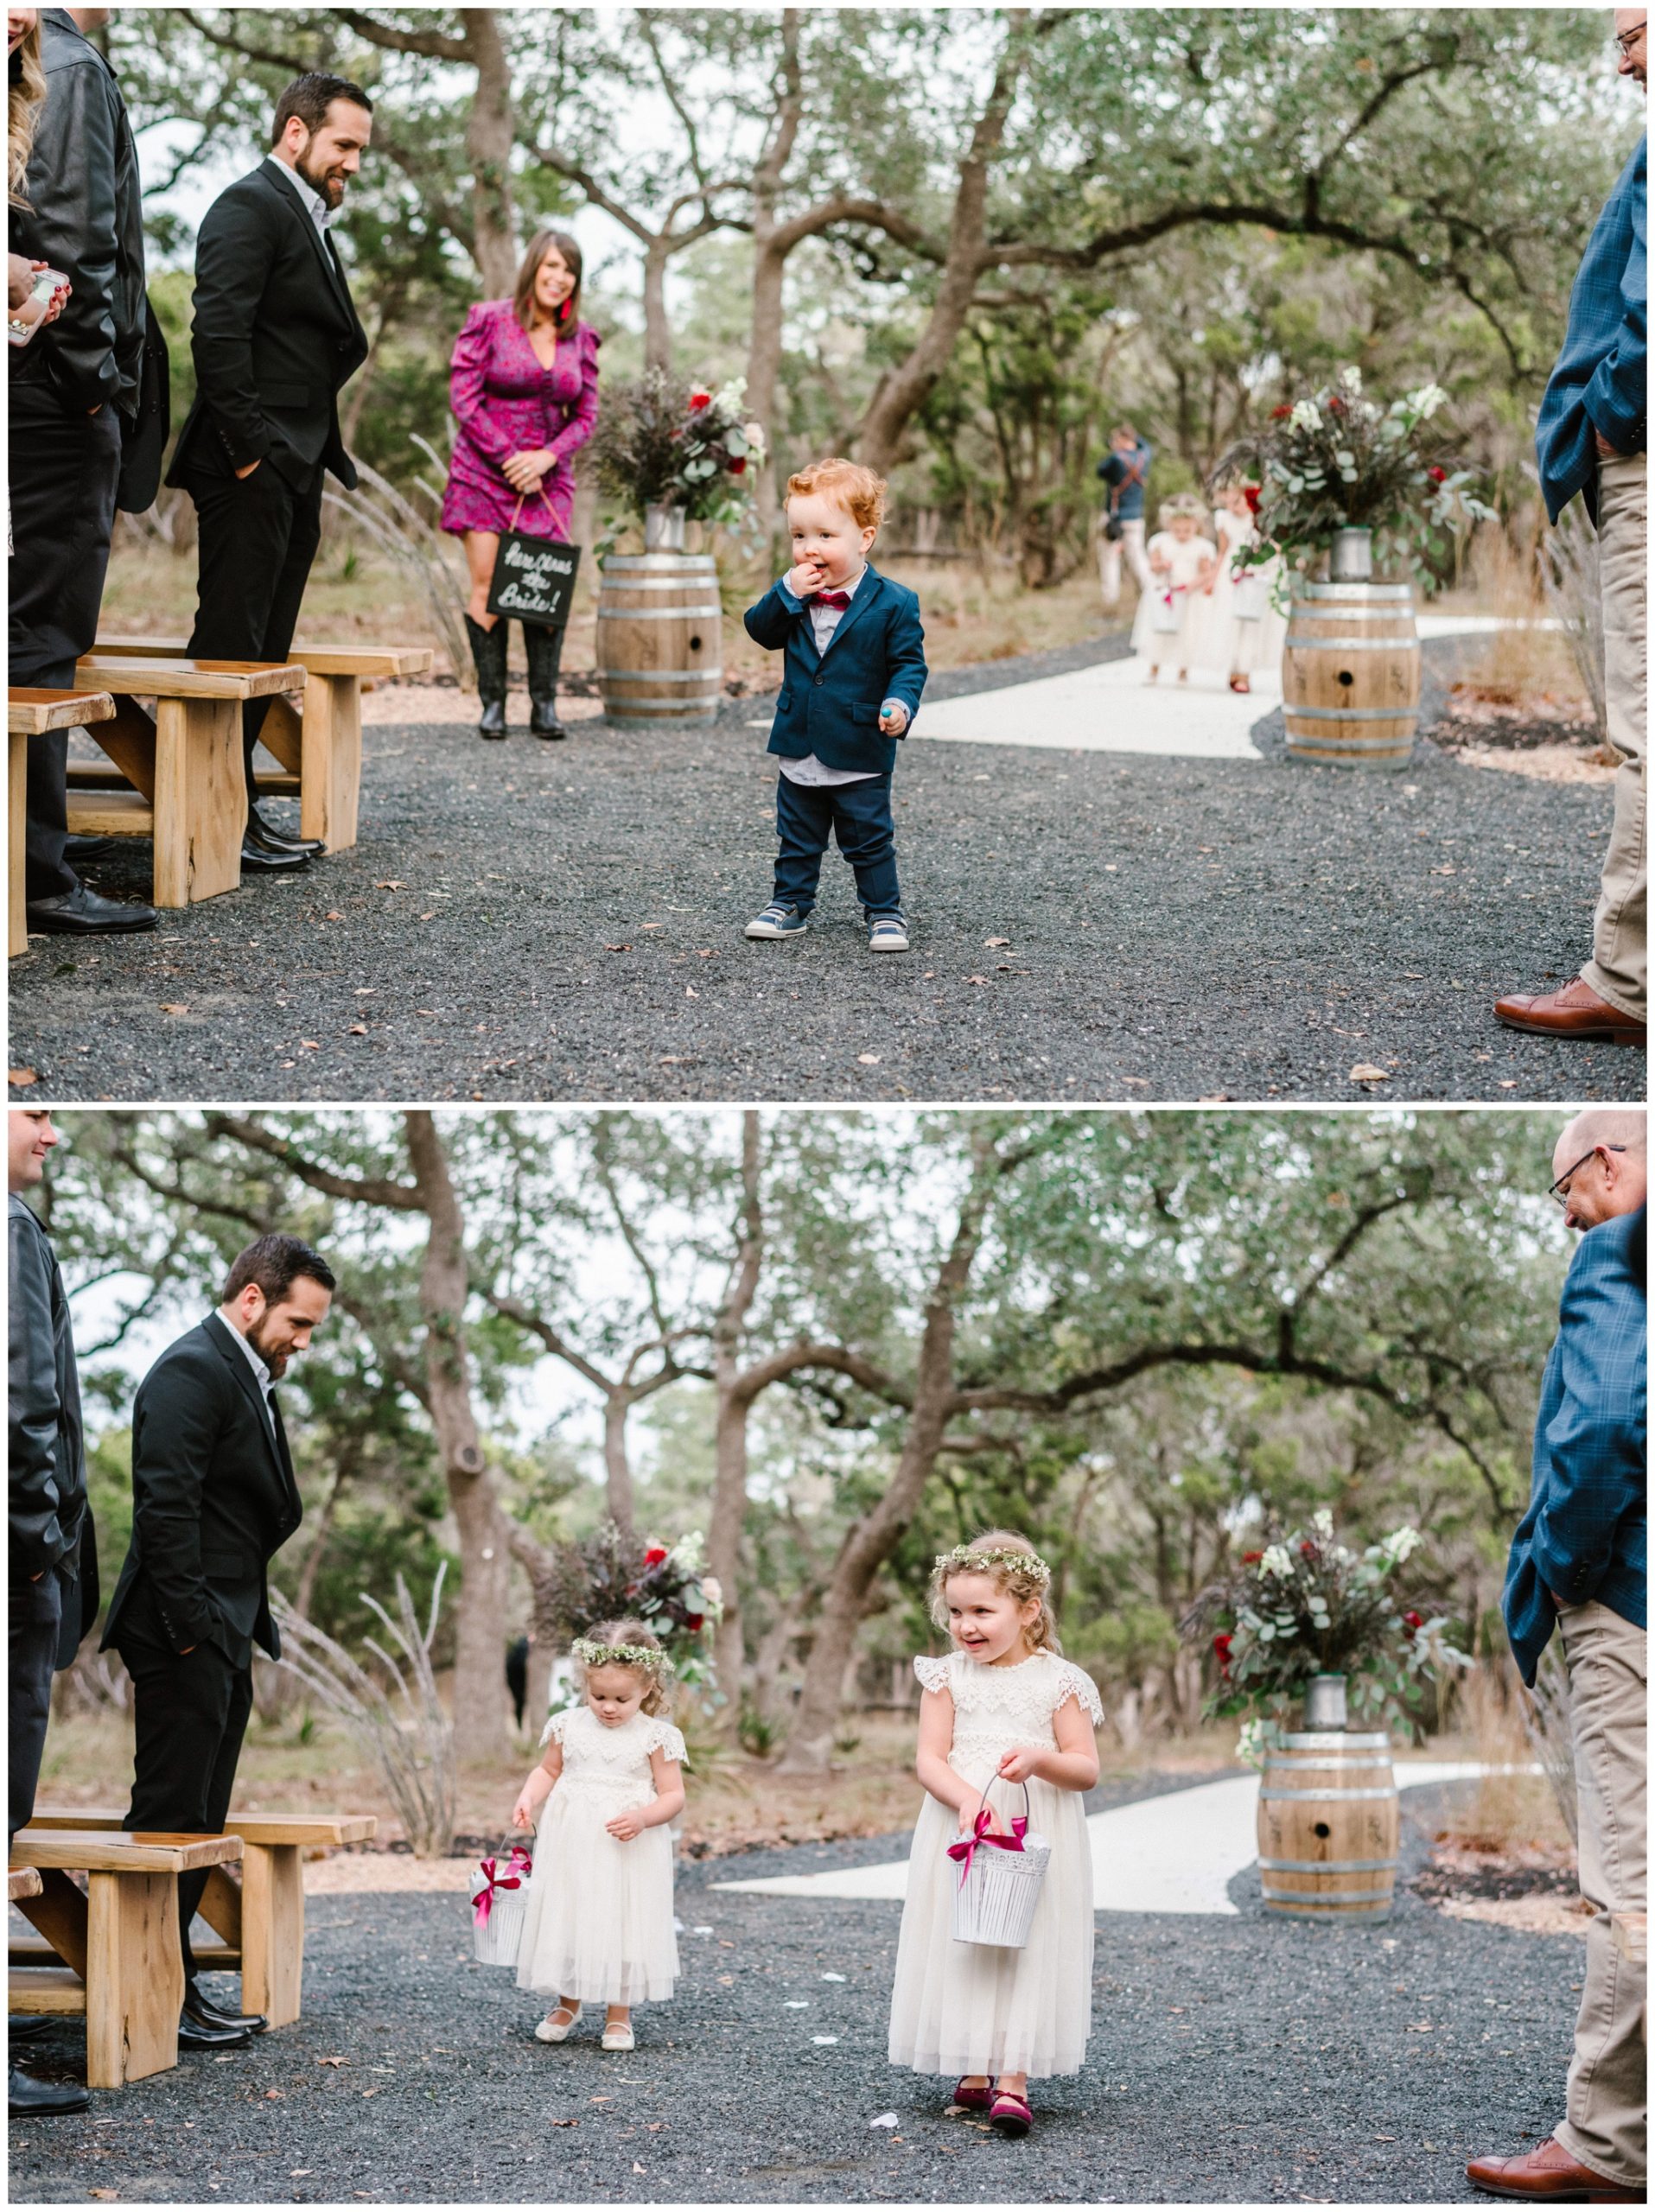 Adorable ring bearer and flower girl ideas, Cedars Ranch Venue, Austin TX light and airy wedding photographer, Joslyn Holtfort Photography